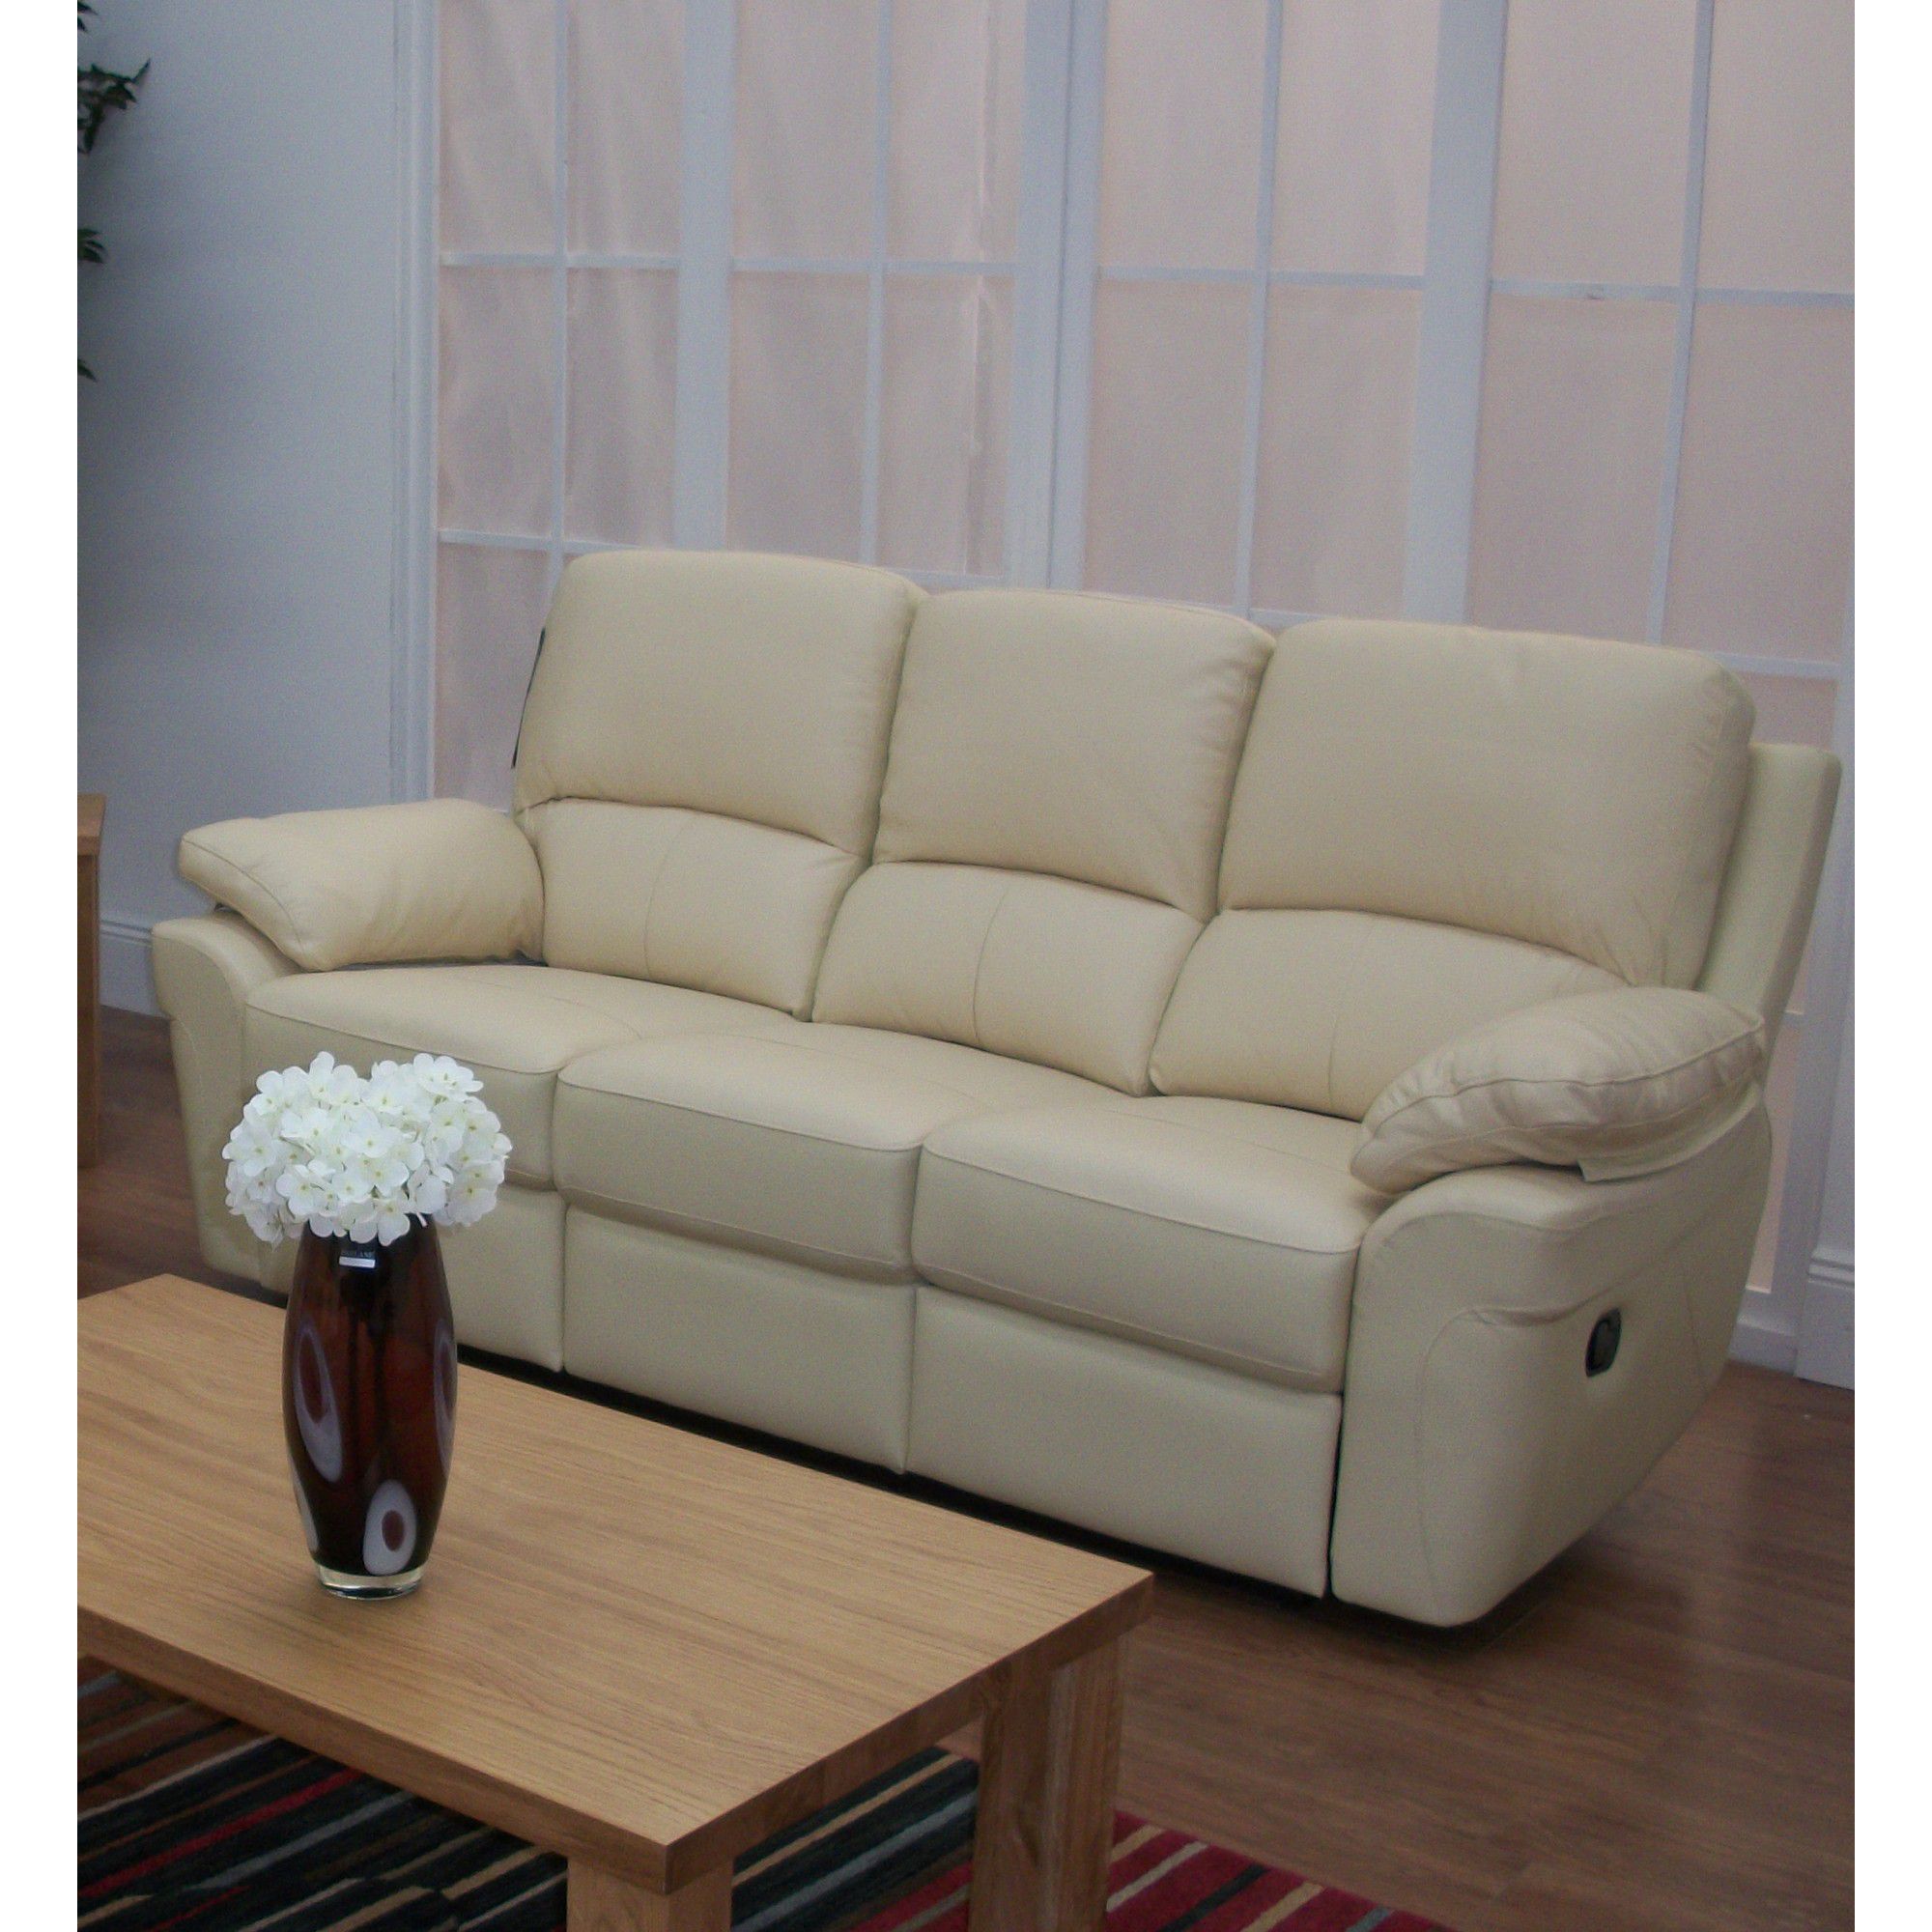 Furniture Link Monzano Three Fixed Seat Sofa in Ivory - Chestnut at Tesco Direct